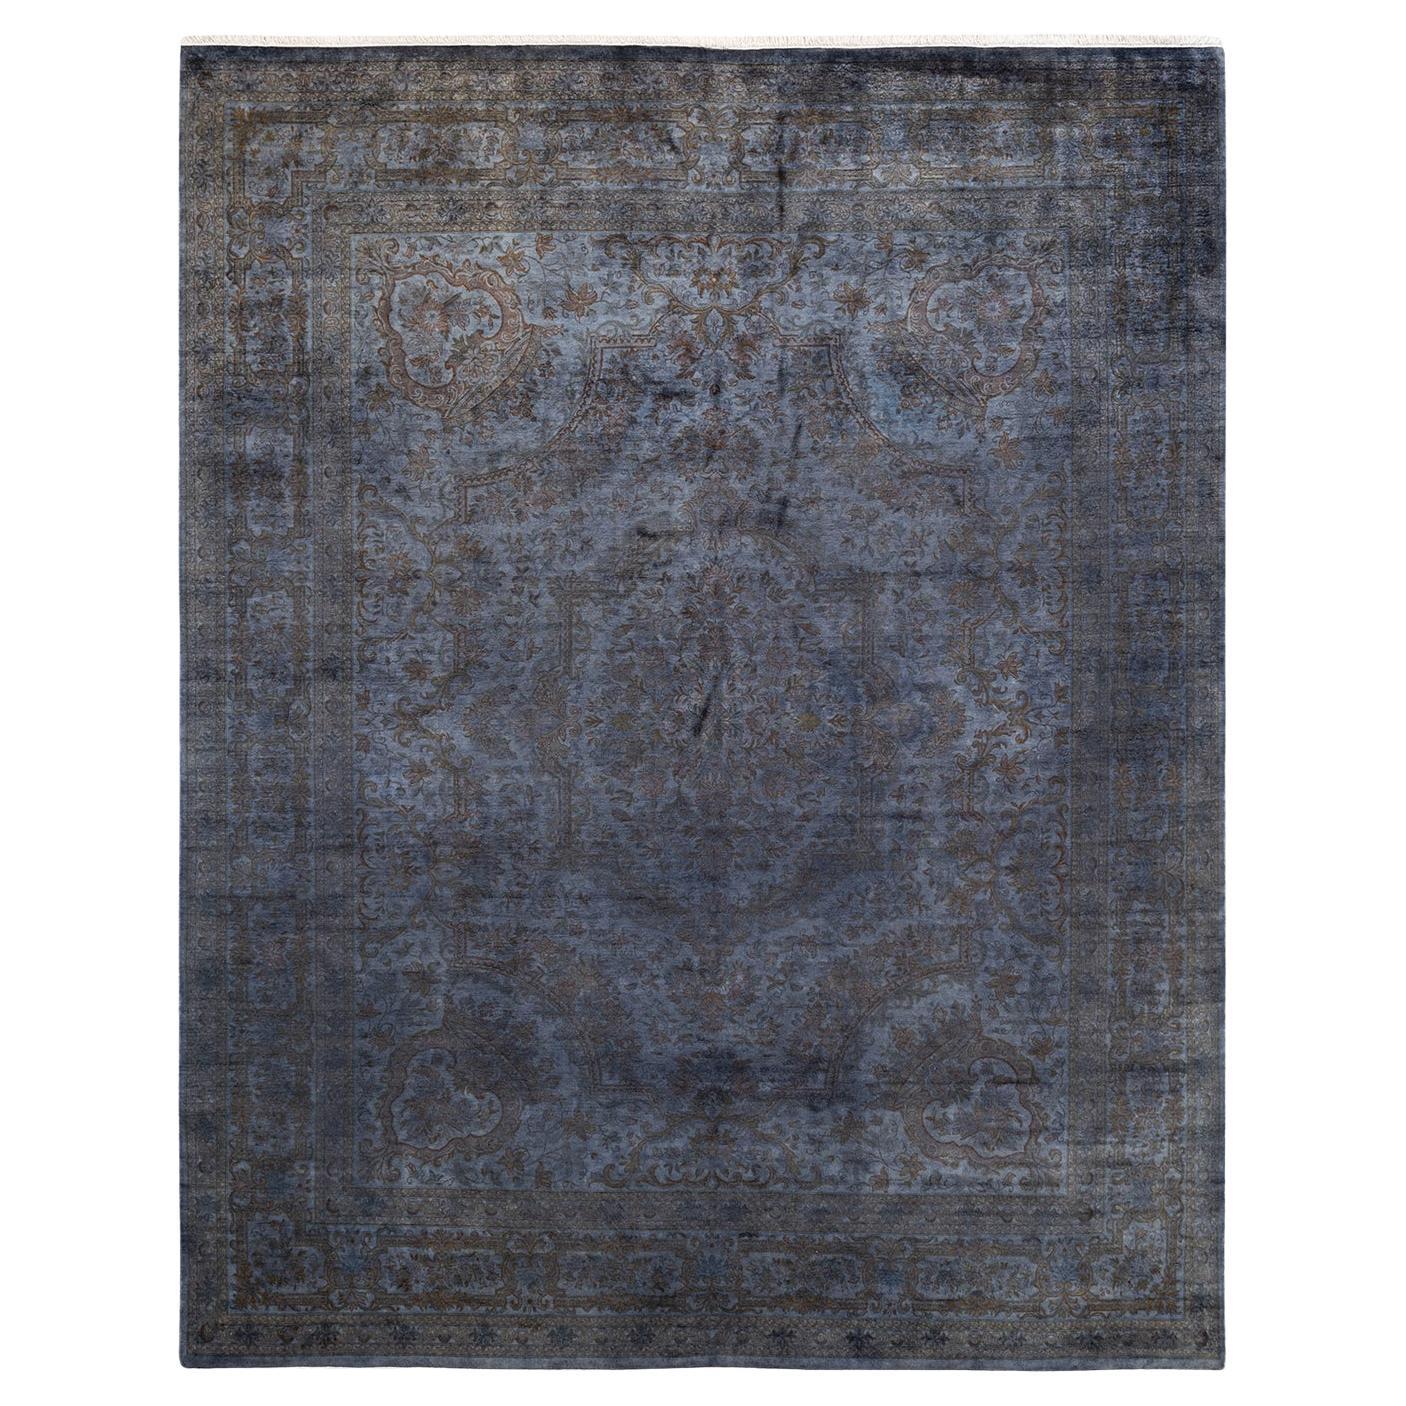 One of a Kind Overdyed Hand Knotted Wool Light Gray Area Rug